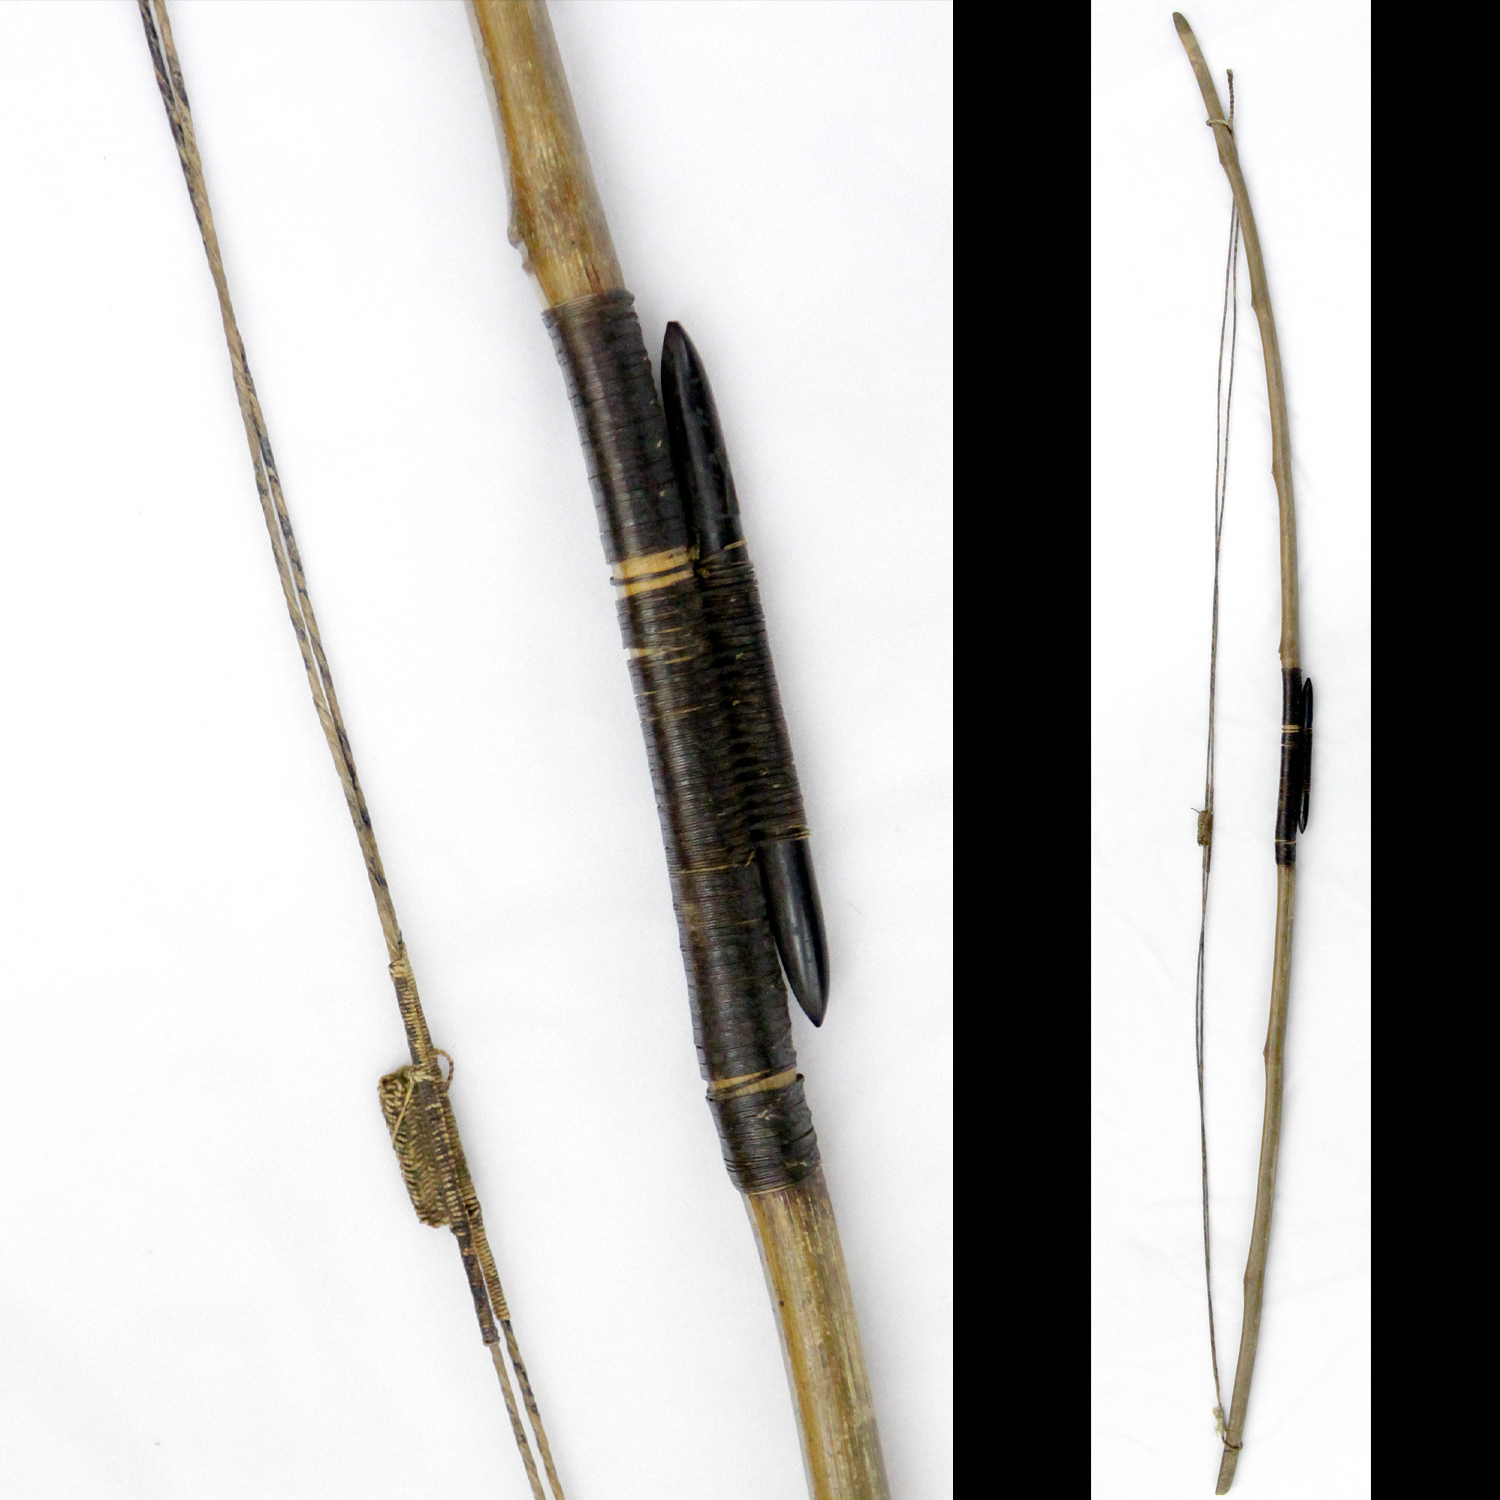 Pellet Bow with detail on left